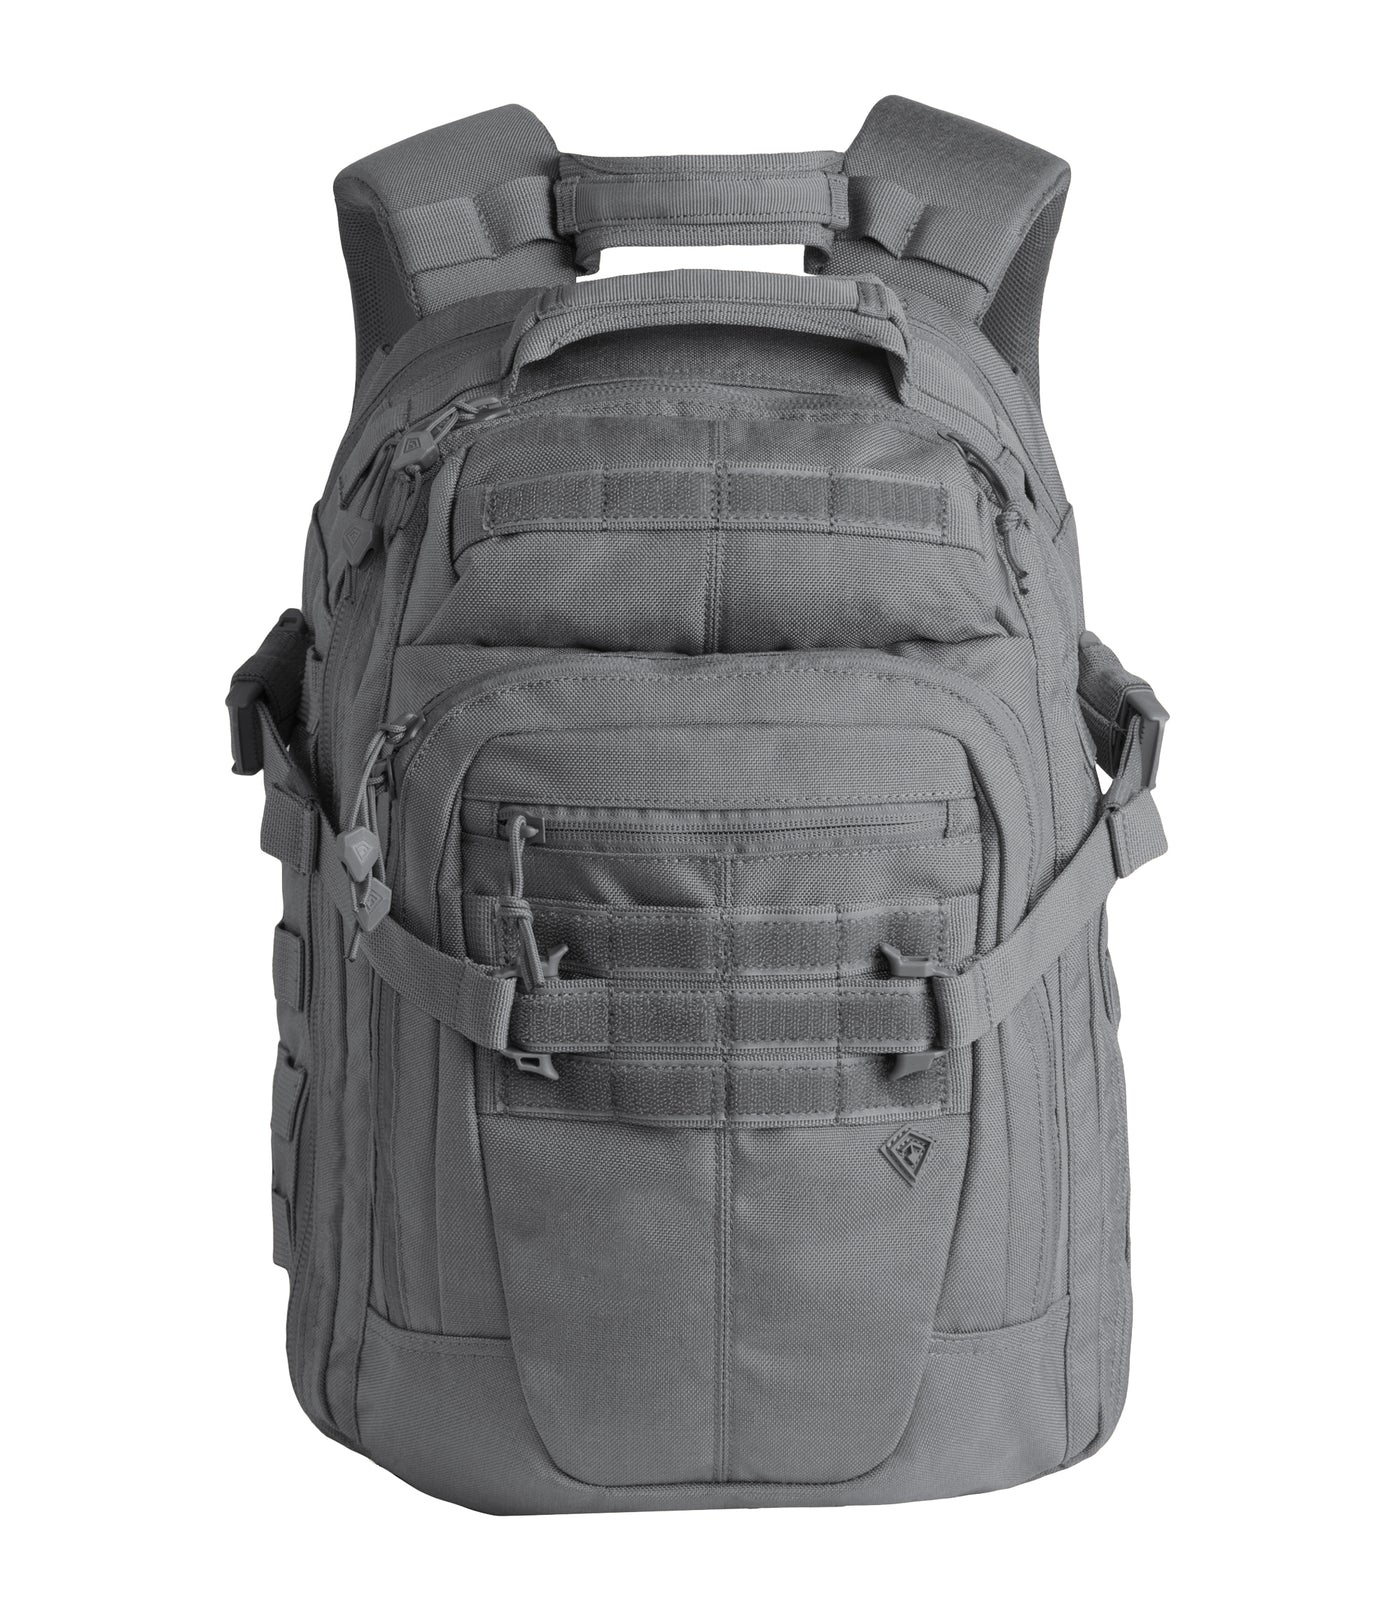 Specialist Half-Day Backpack 25L – First Tactical